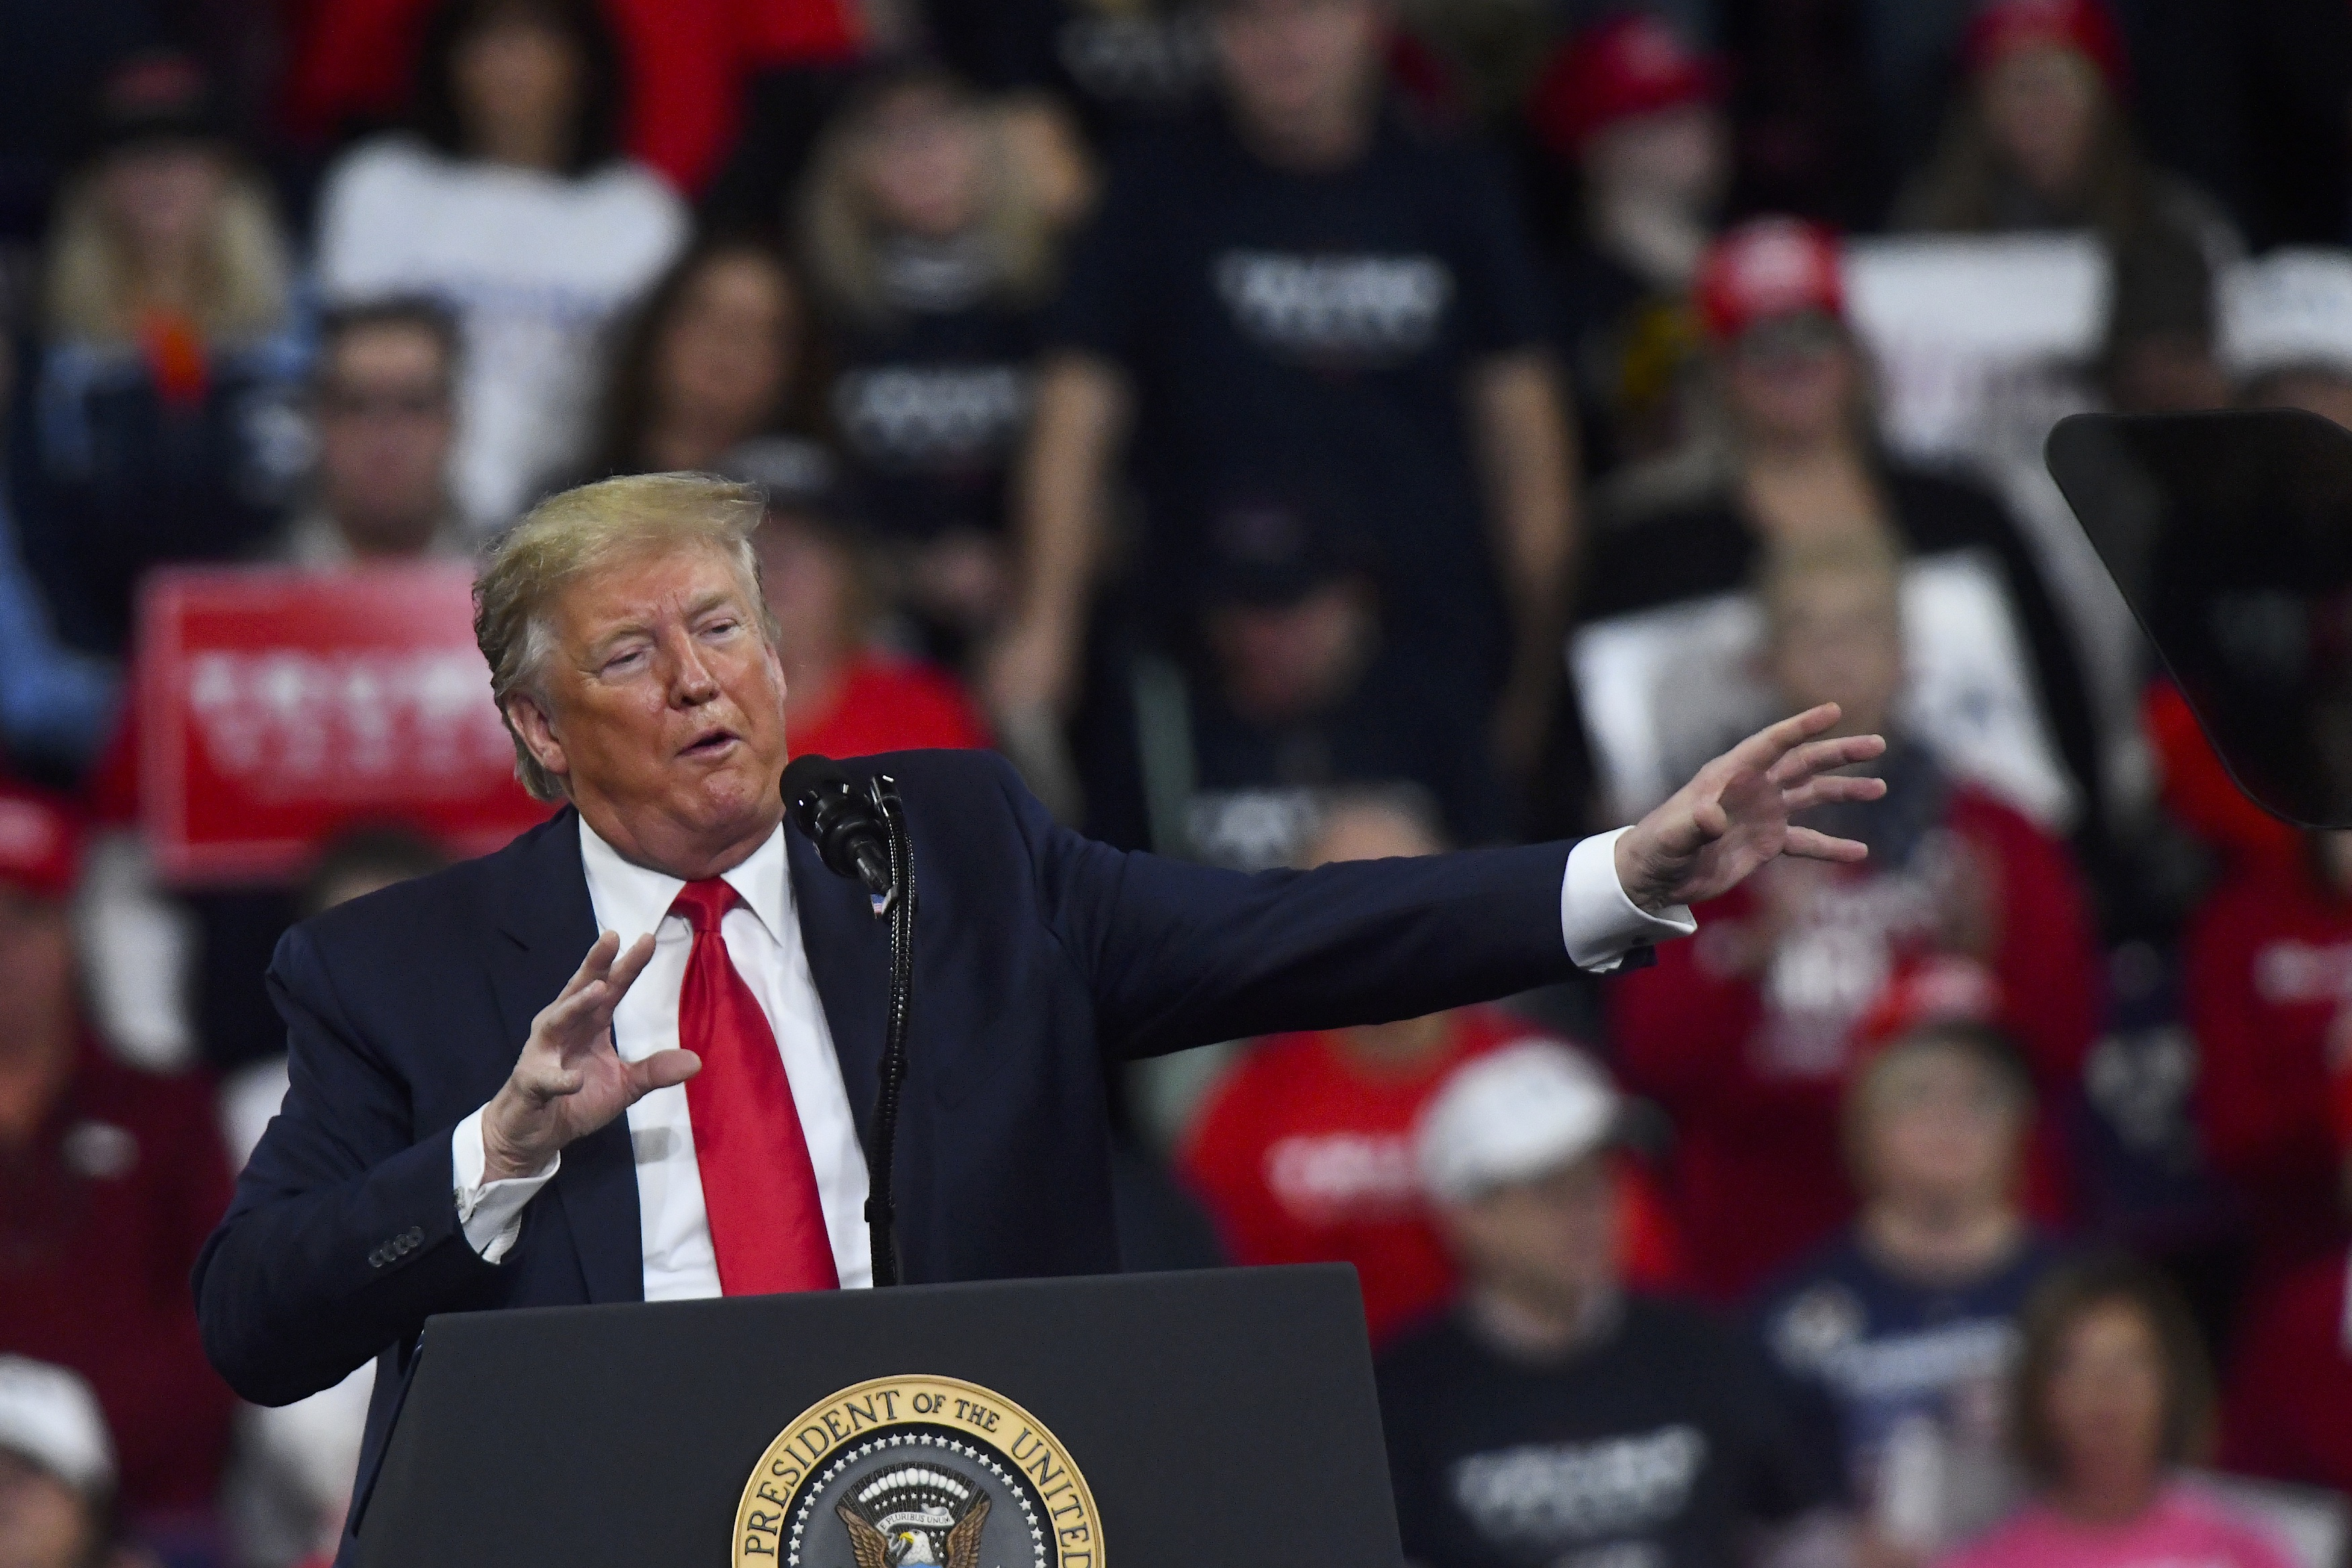 HERSHEY, PA - DECEMBER 10: U.S. President Donald Trump speaks during a campaign rally on December 10, 2019 in Hershey, Pennsylvania. This rally marks the third time President Trump has held a campaign rally at Giant Center. The attendance of both President and Vice President signifies the importance Pennsylvania holds as a key battleground state. (Photo by Mark Makela/Getty Images)